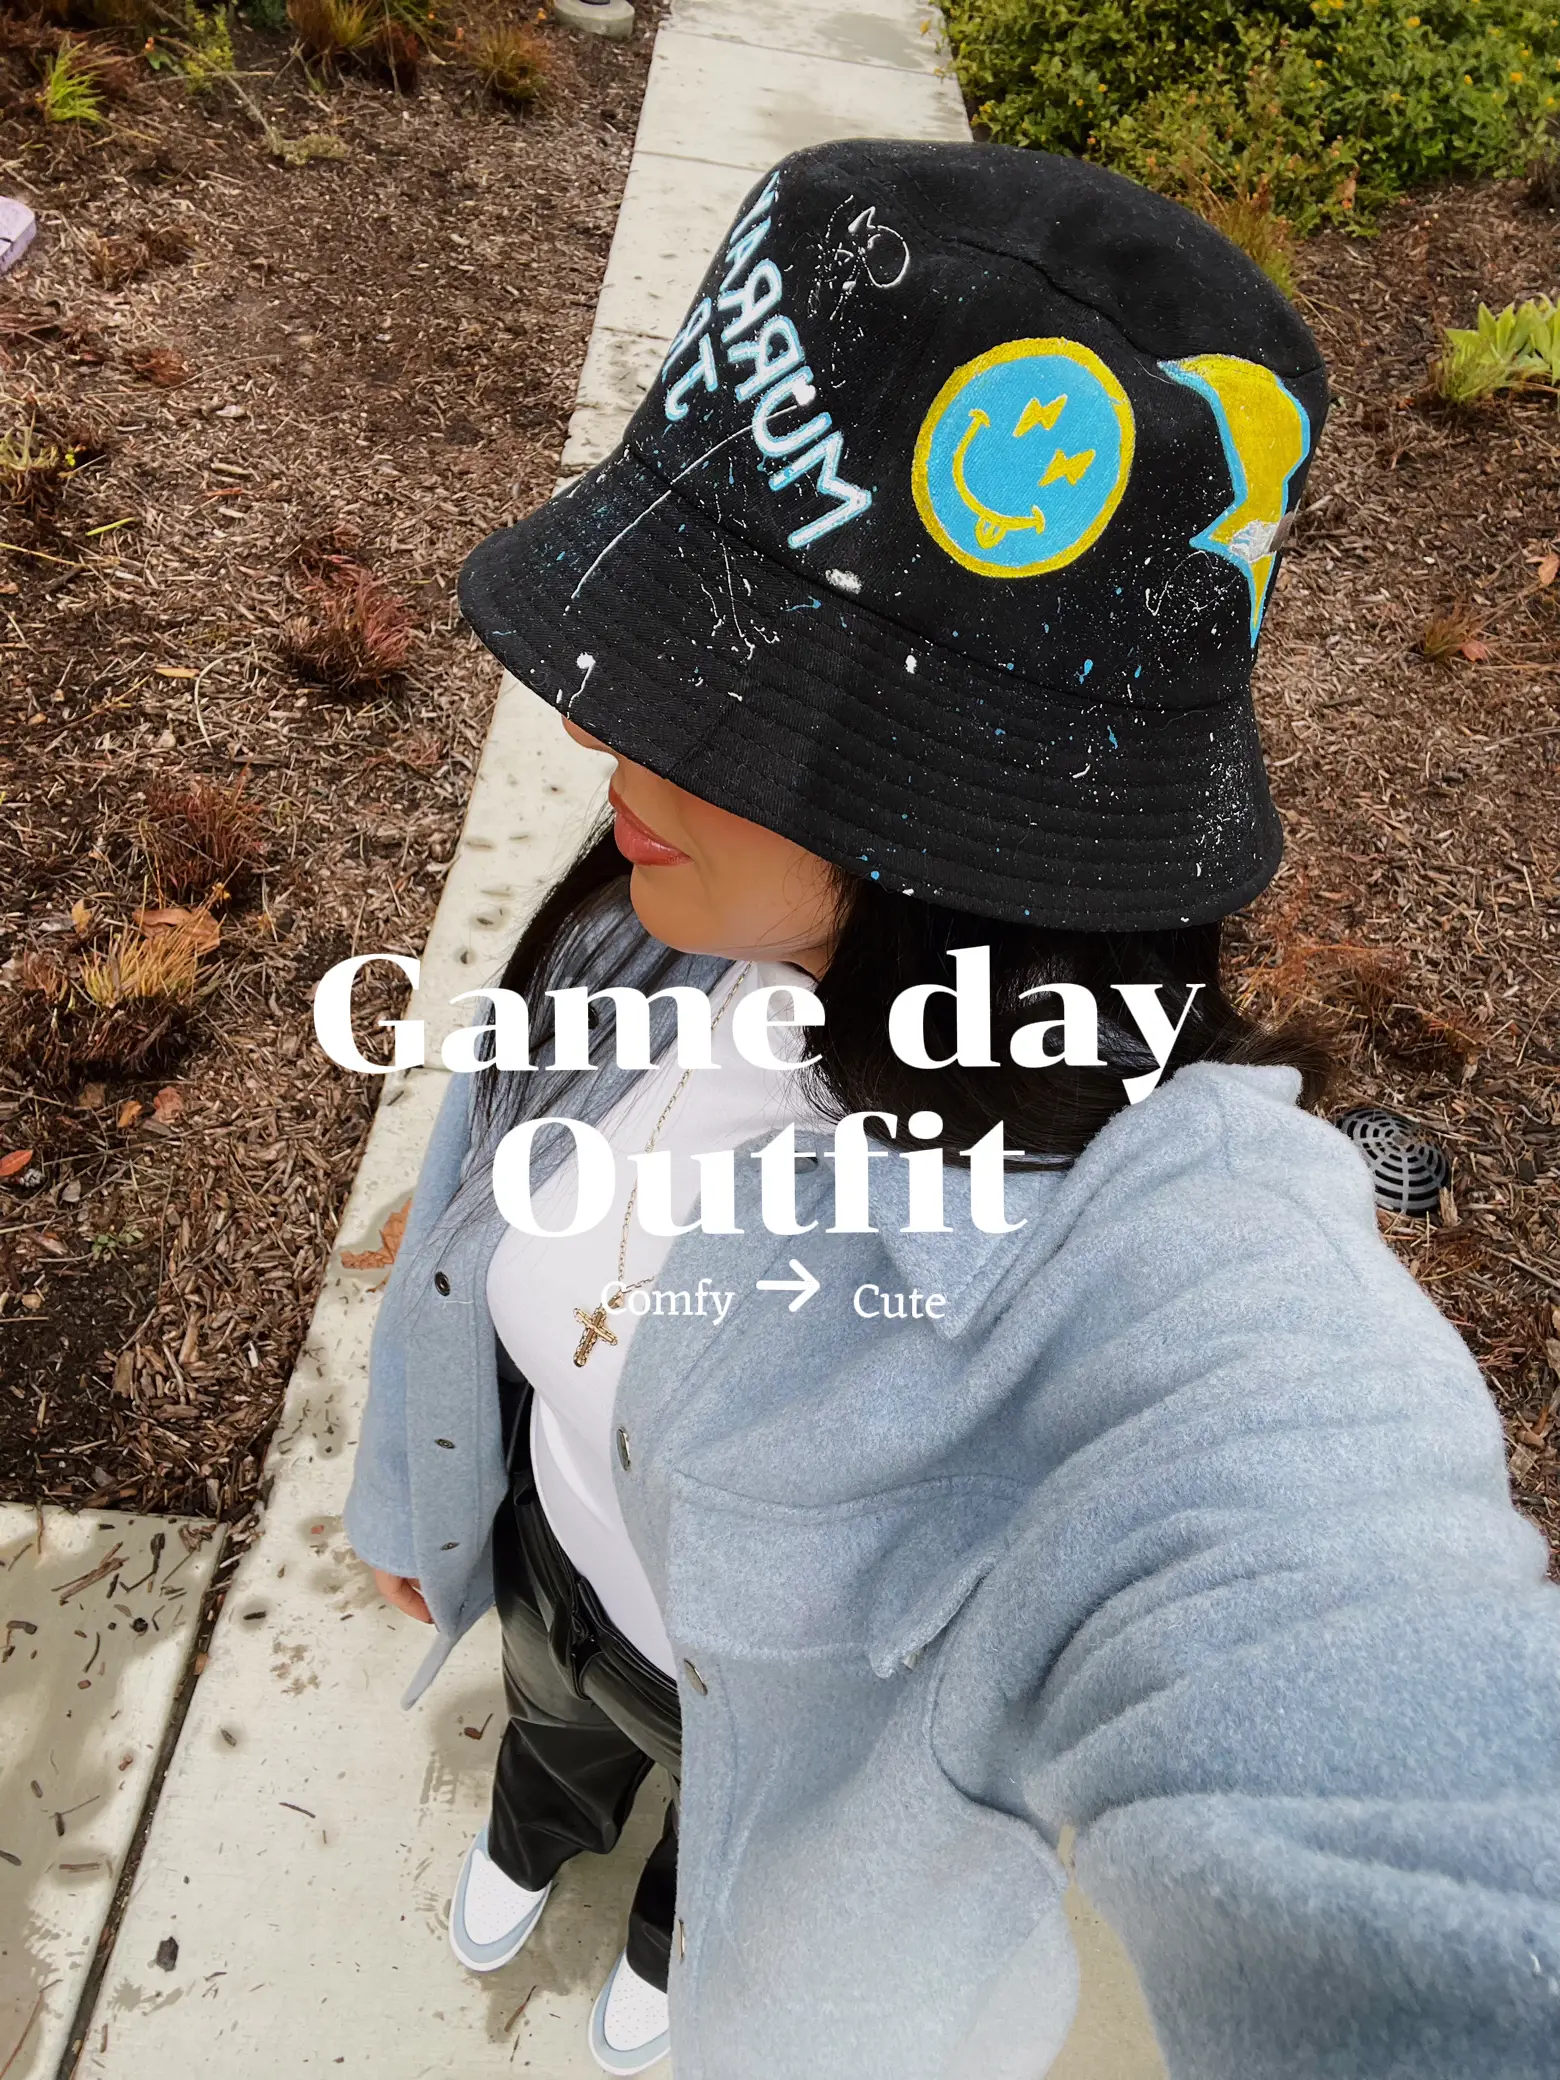 Game Day Outfit Ideas